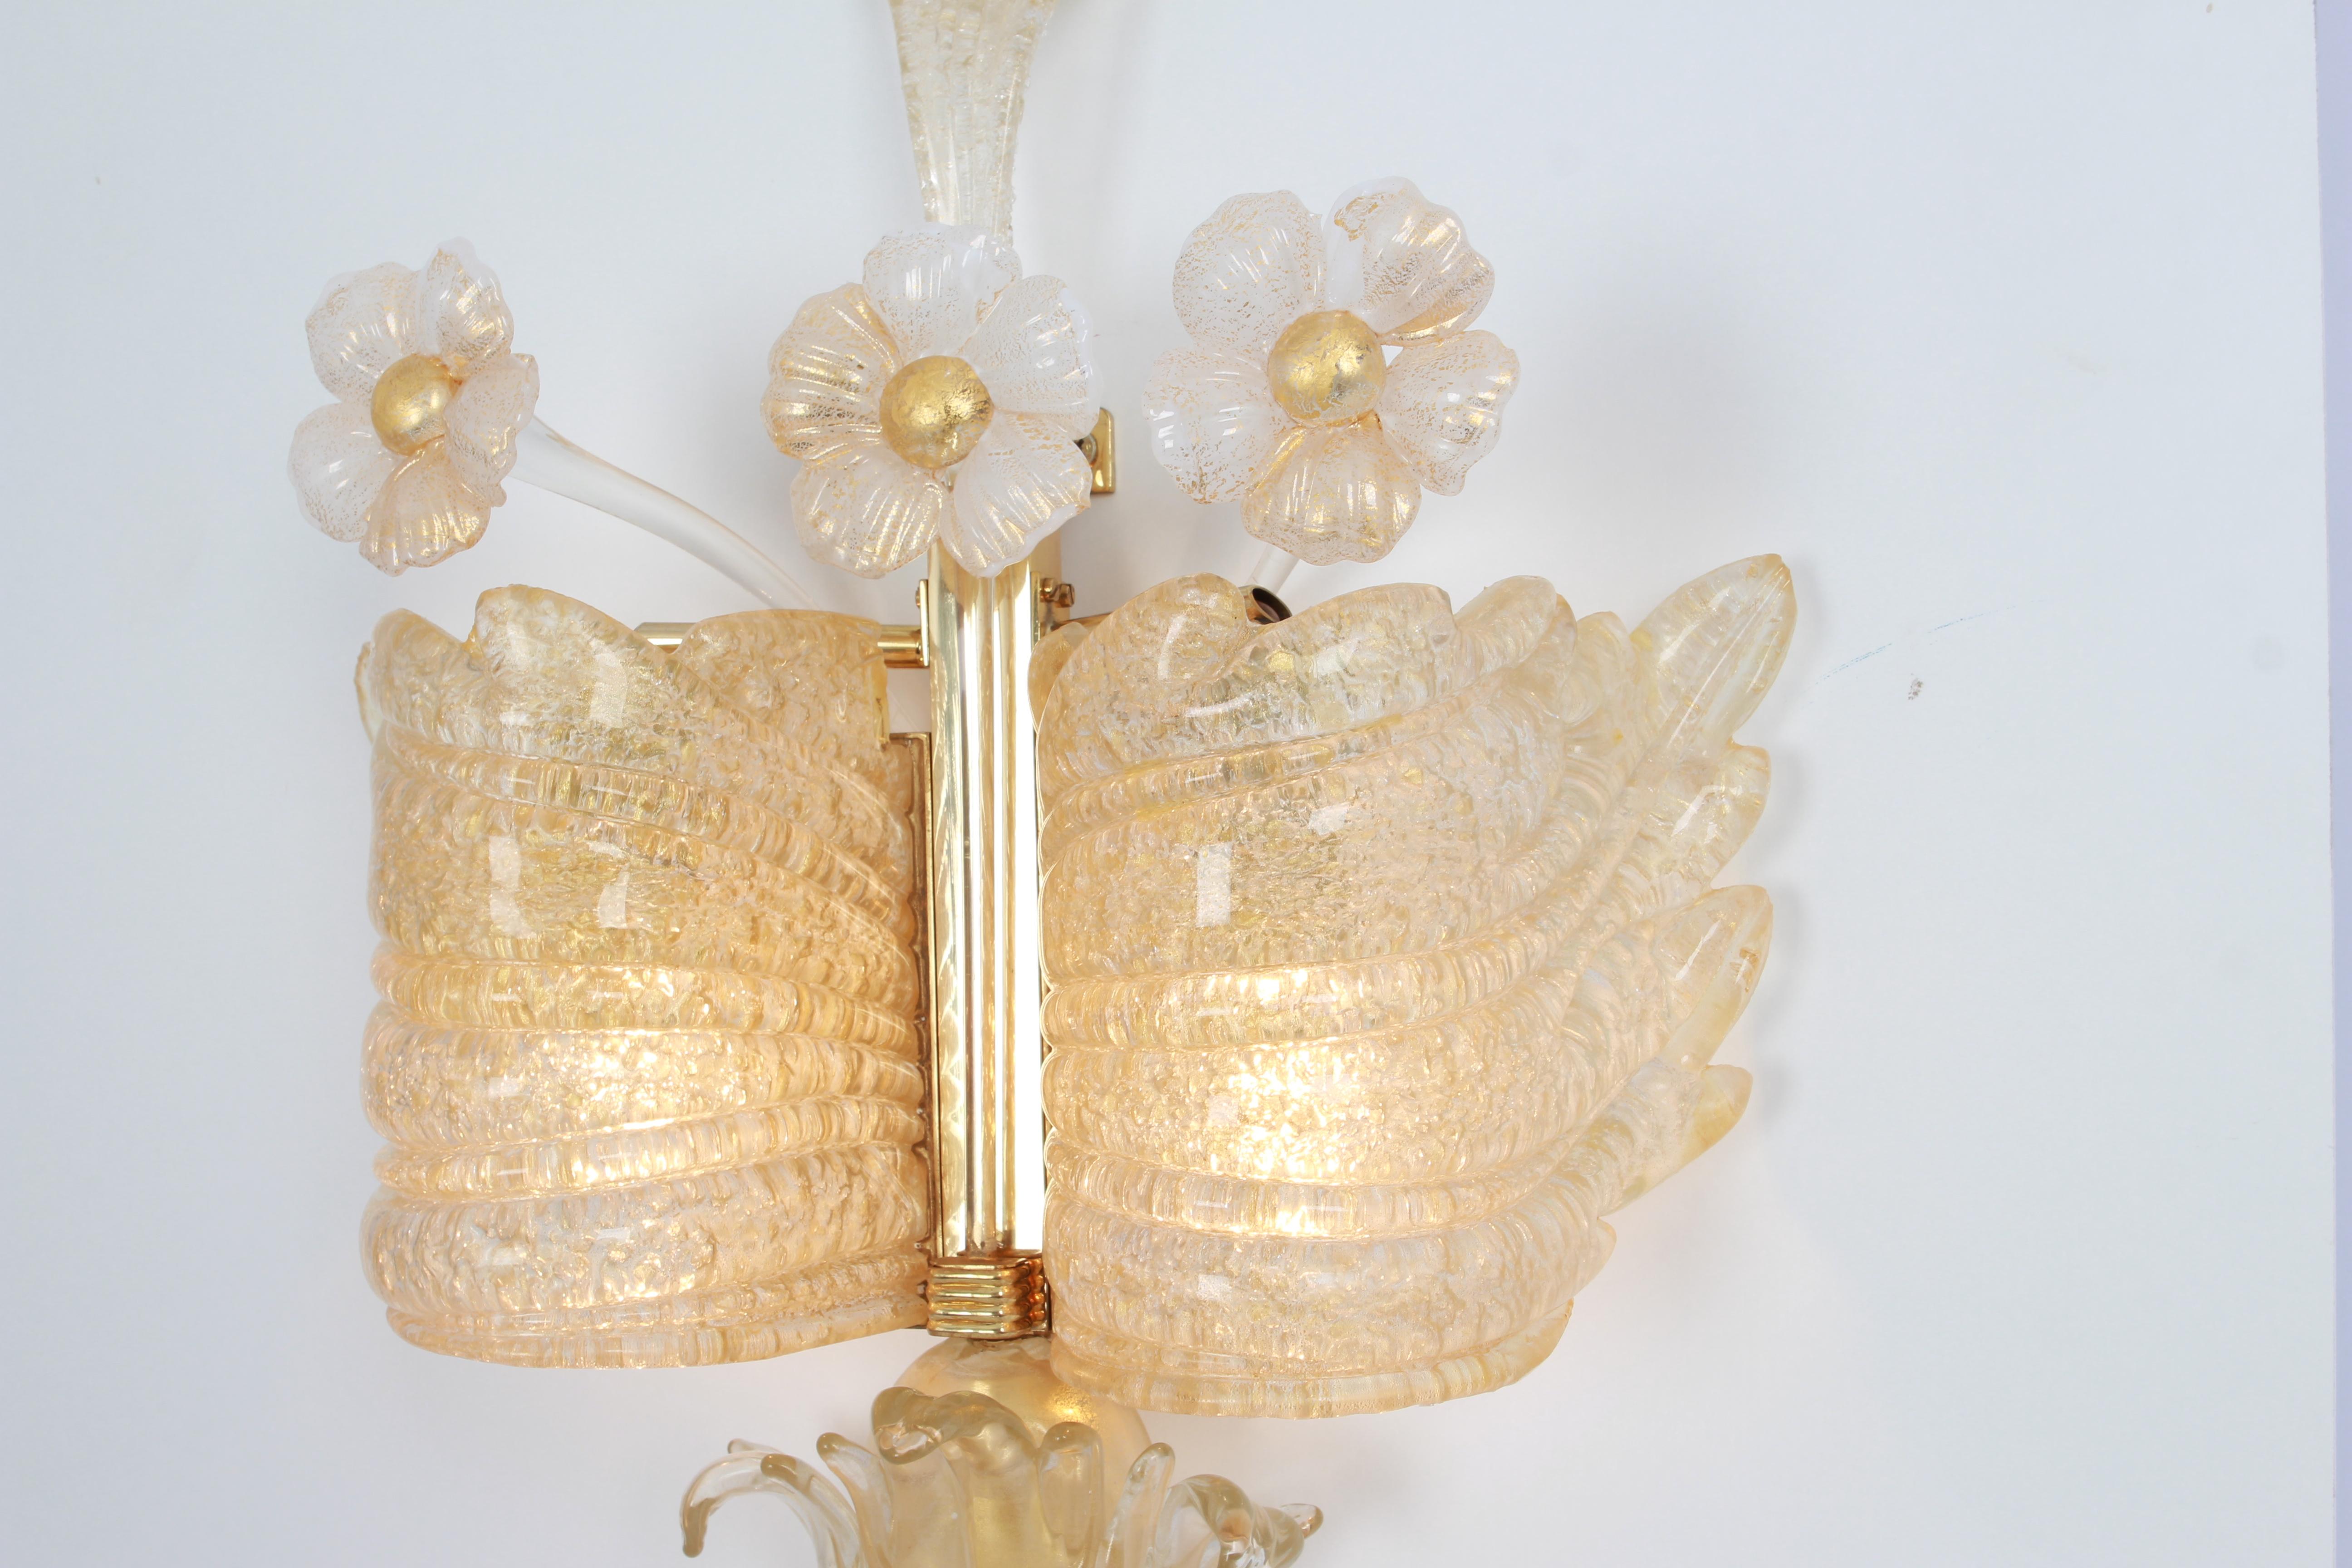 Pair of Large Murano Glass Wall Sconces by Barovier & Toso, Italy, 1970s For Sale 1